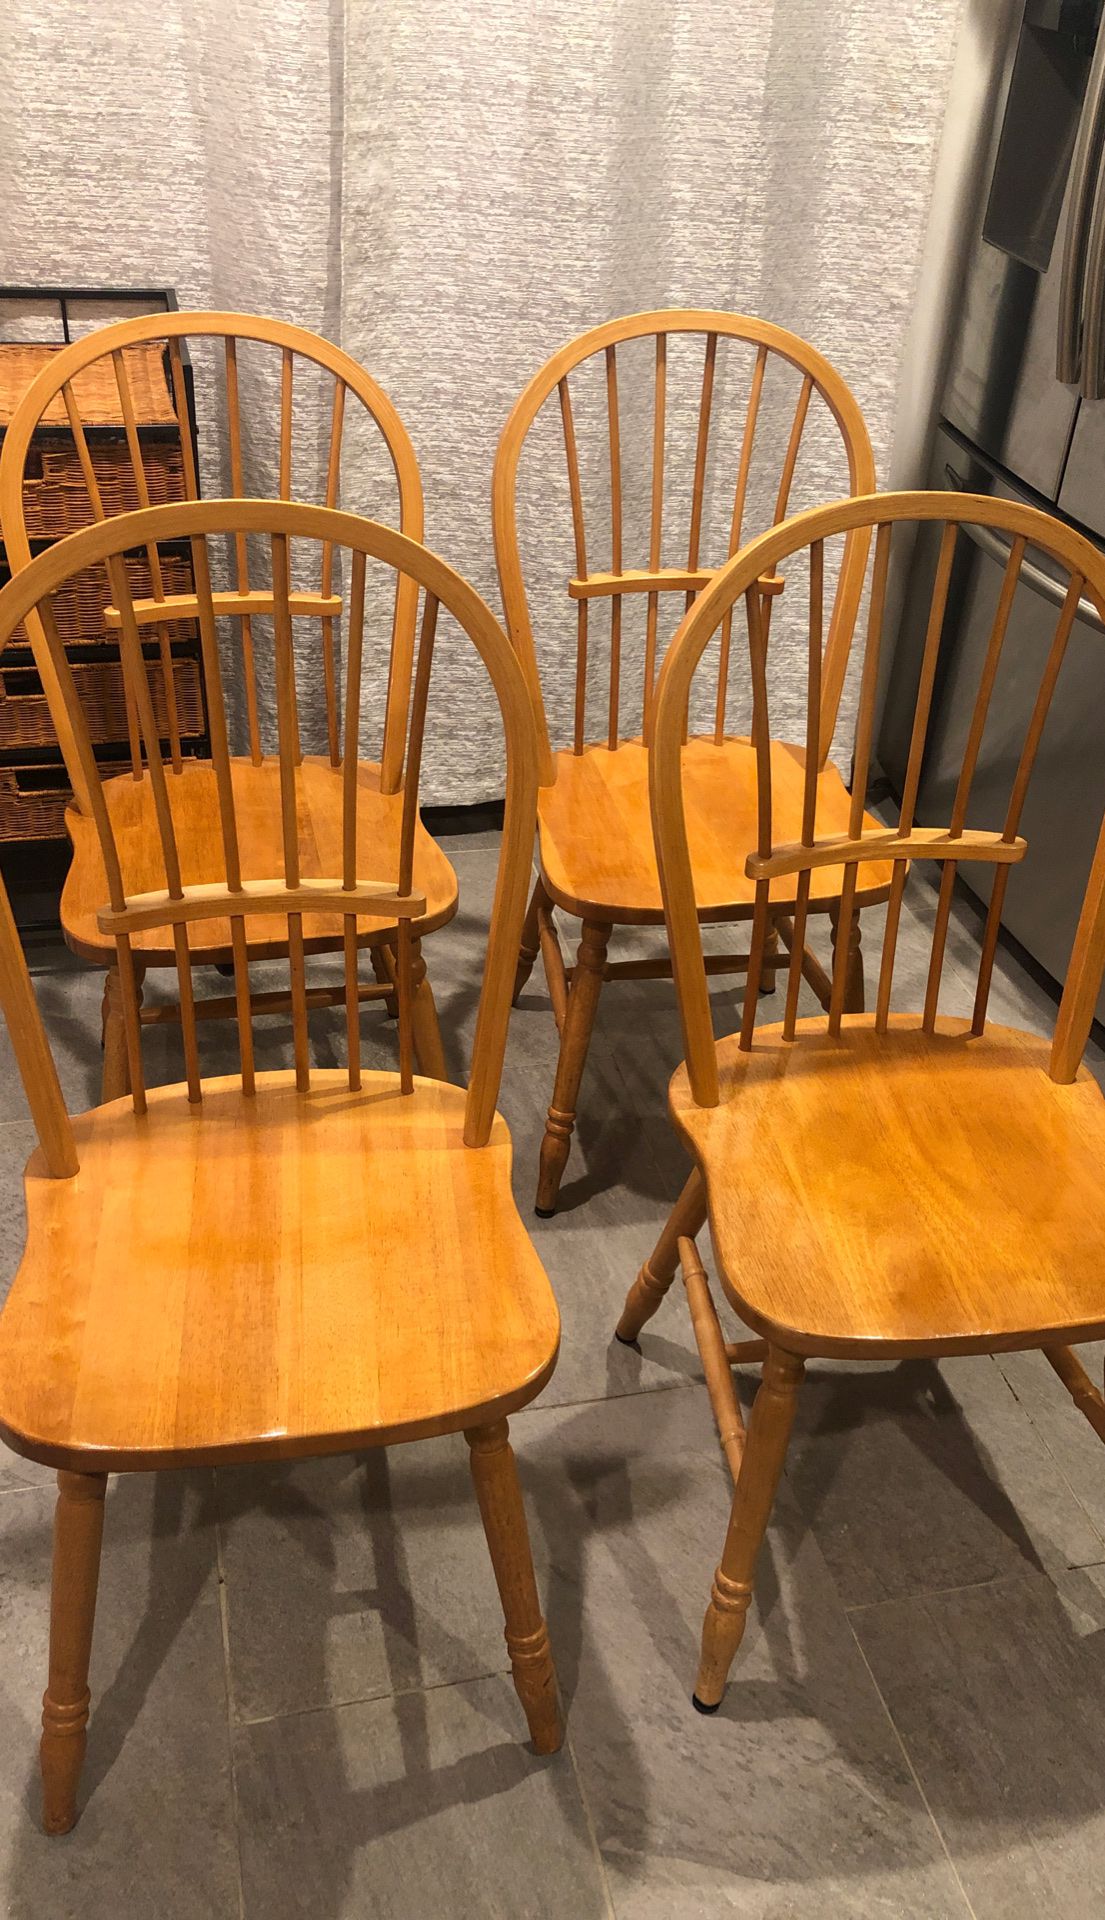 Beautiful set-of-4 Home Kitchen Dining Chairs 🪑 w/Plain Wood Seat in Natural light wood color